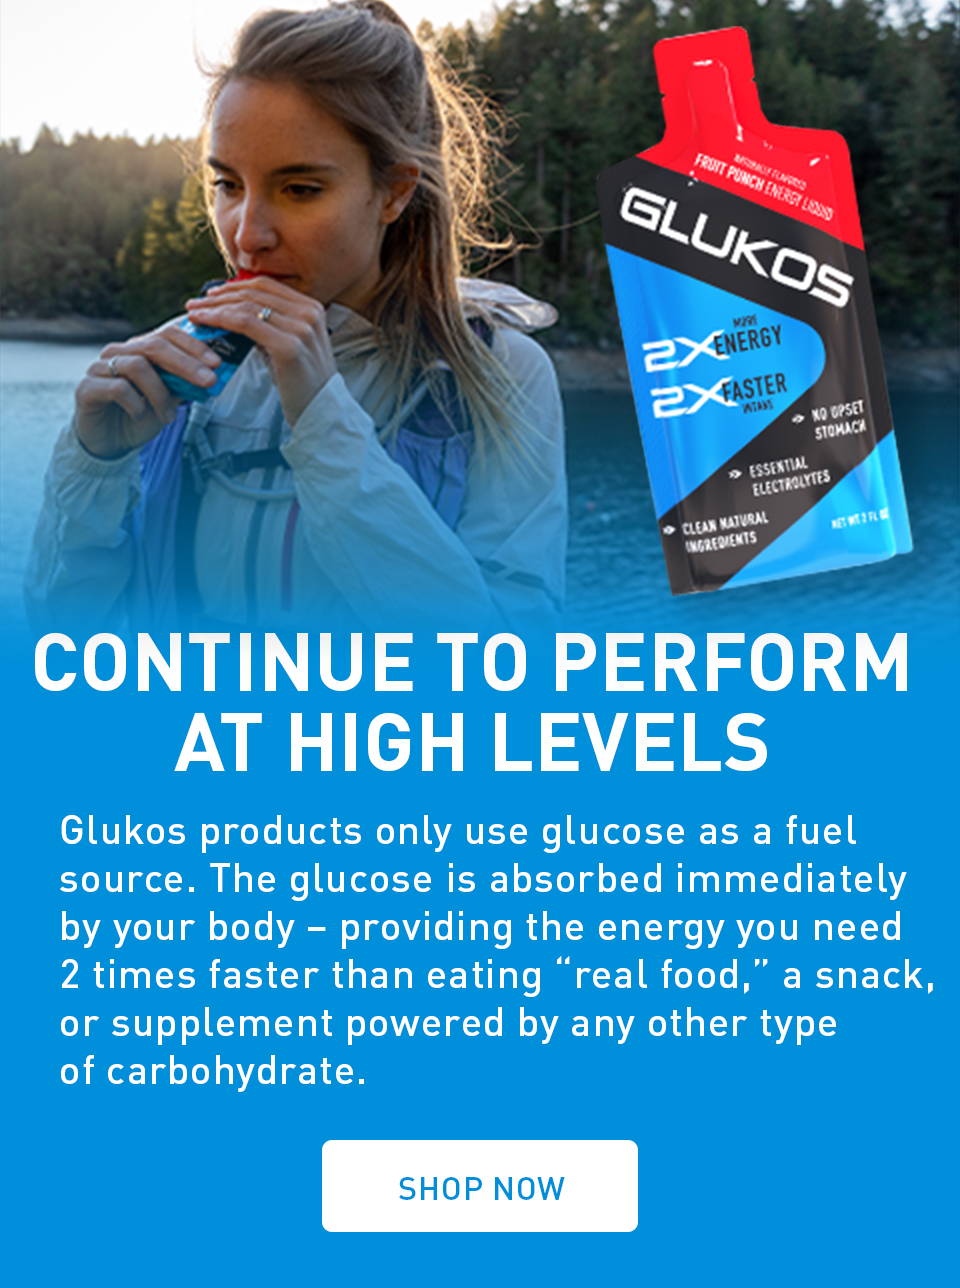 Continue to perform at high levels. Glukos products only use glucose as a fuel source. The glucose is absorbed immediately by your body - providing the energy you need 2 times faster than eating 